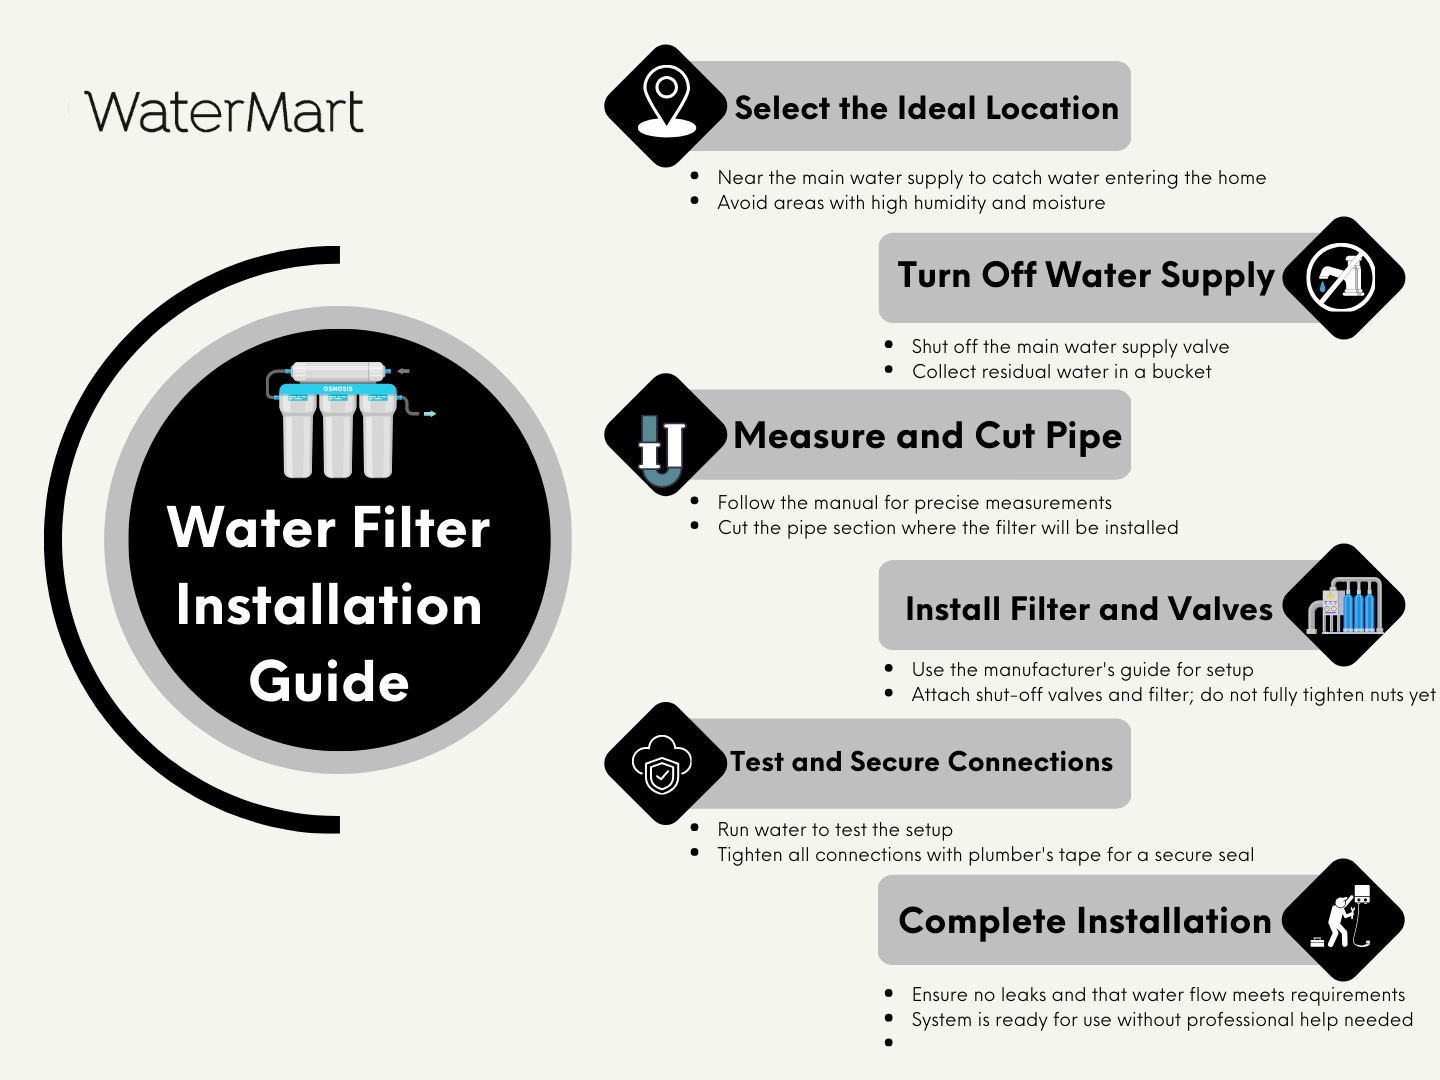 Water Filter Installation Guide